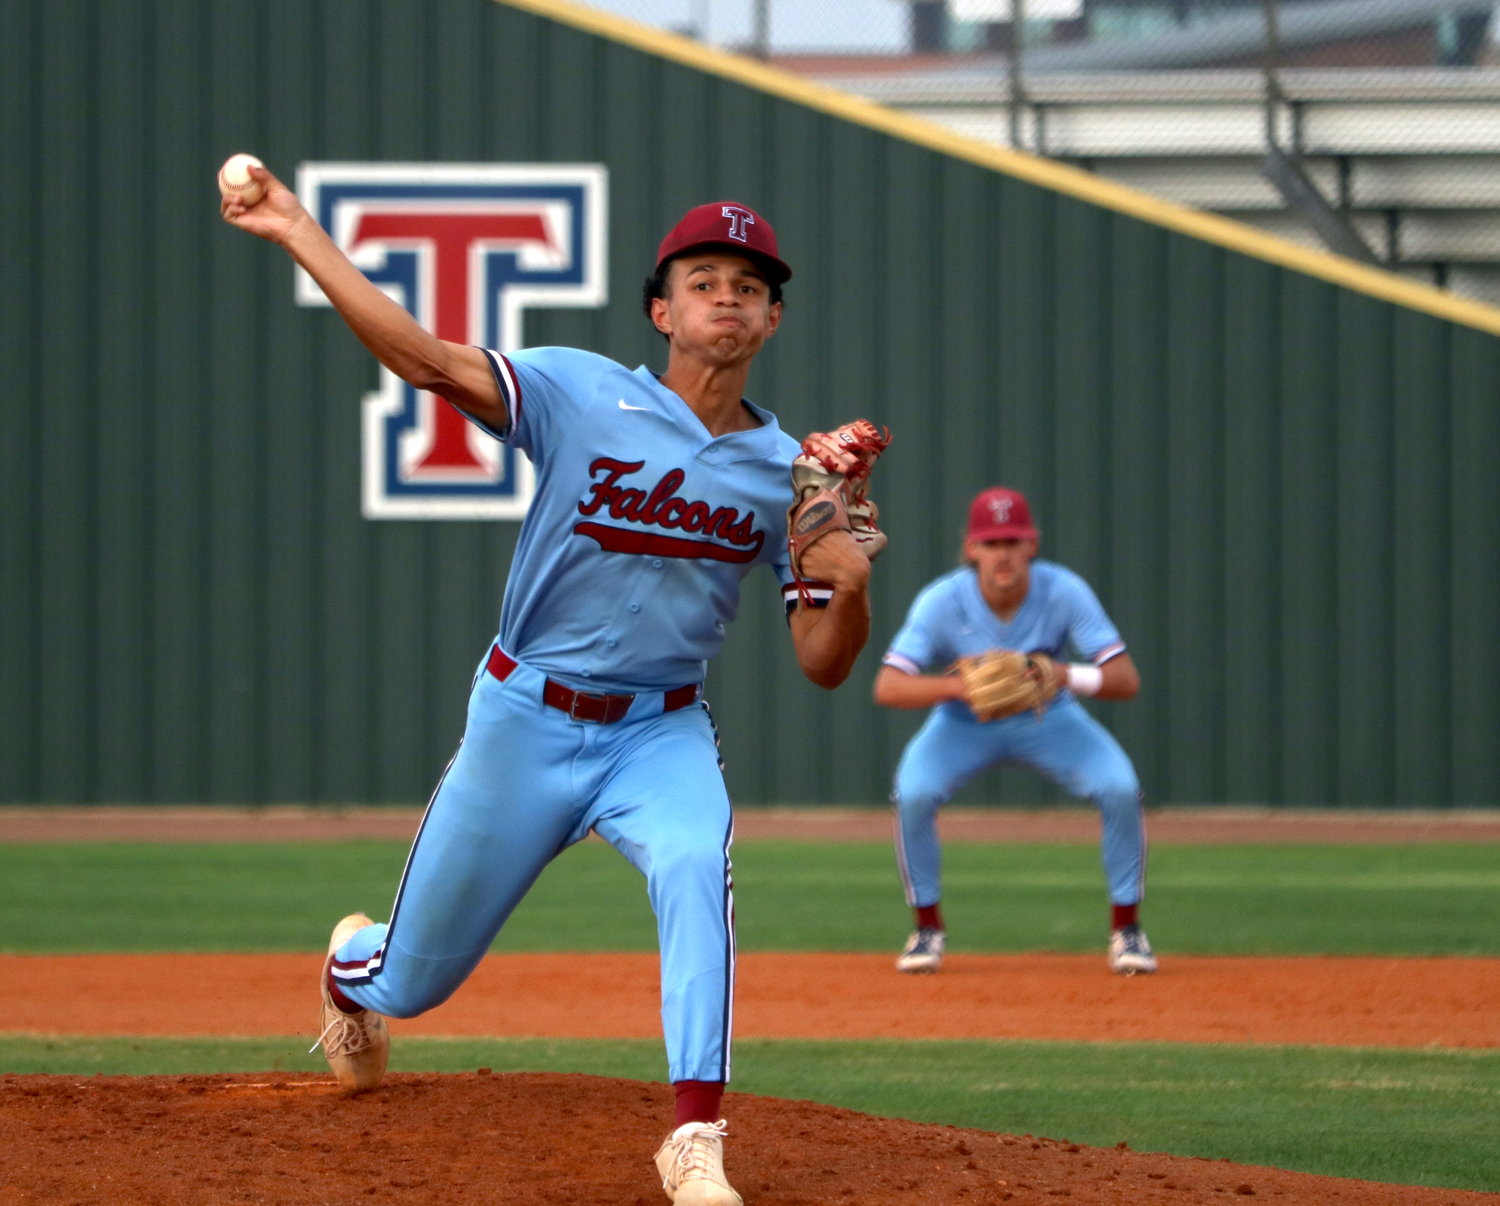 Trevor Esparza pitches during Tuesday’s District 19-6A game between Katy and Tompkins at the Tompkins baseball field.